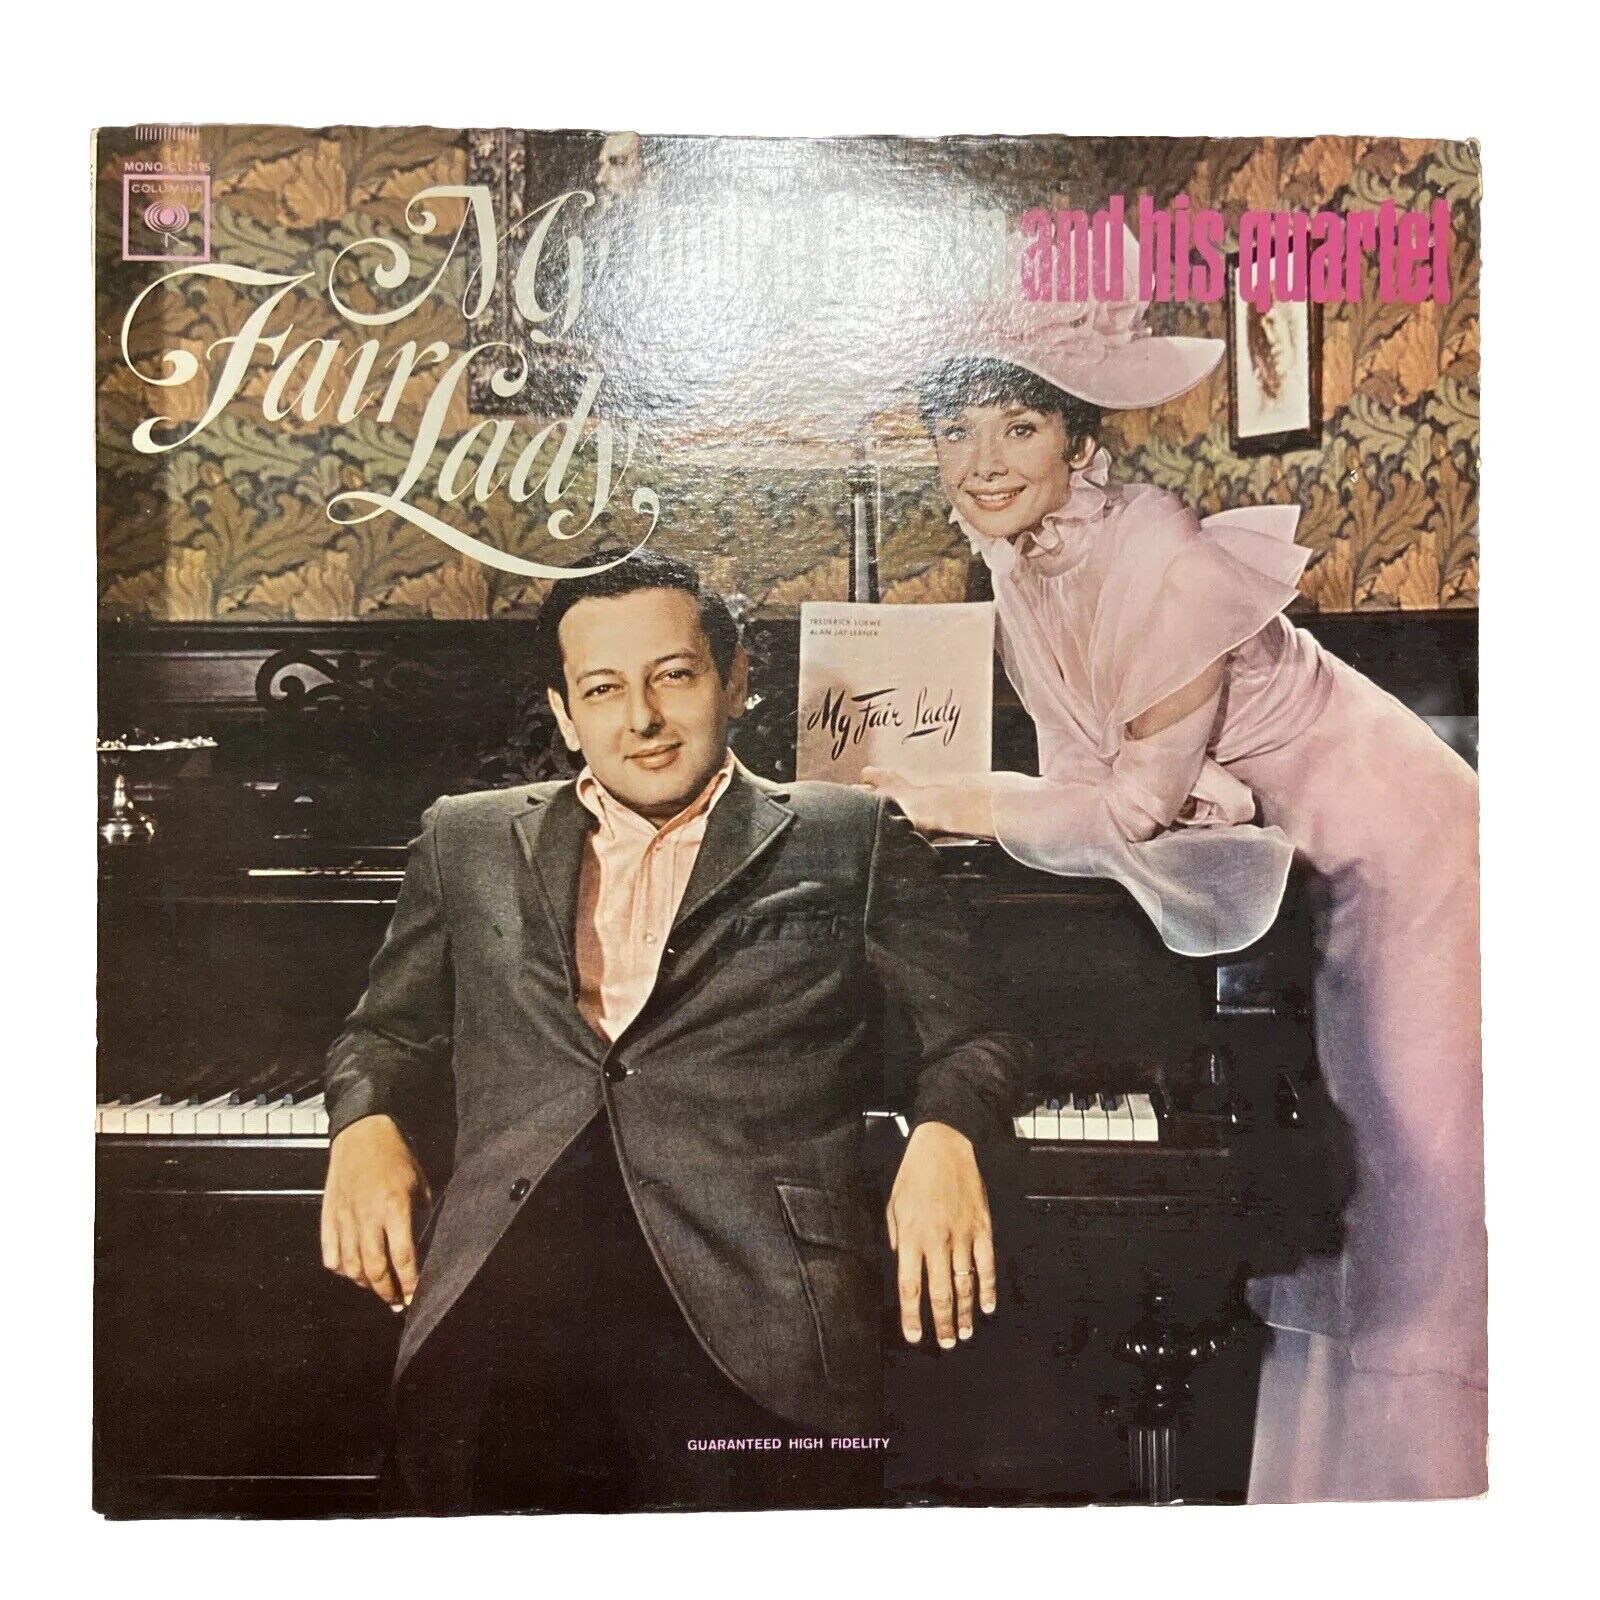 Andre Previn and His Quartet - My Fair Lady - Columbia  1964